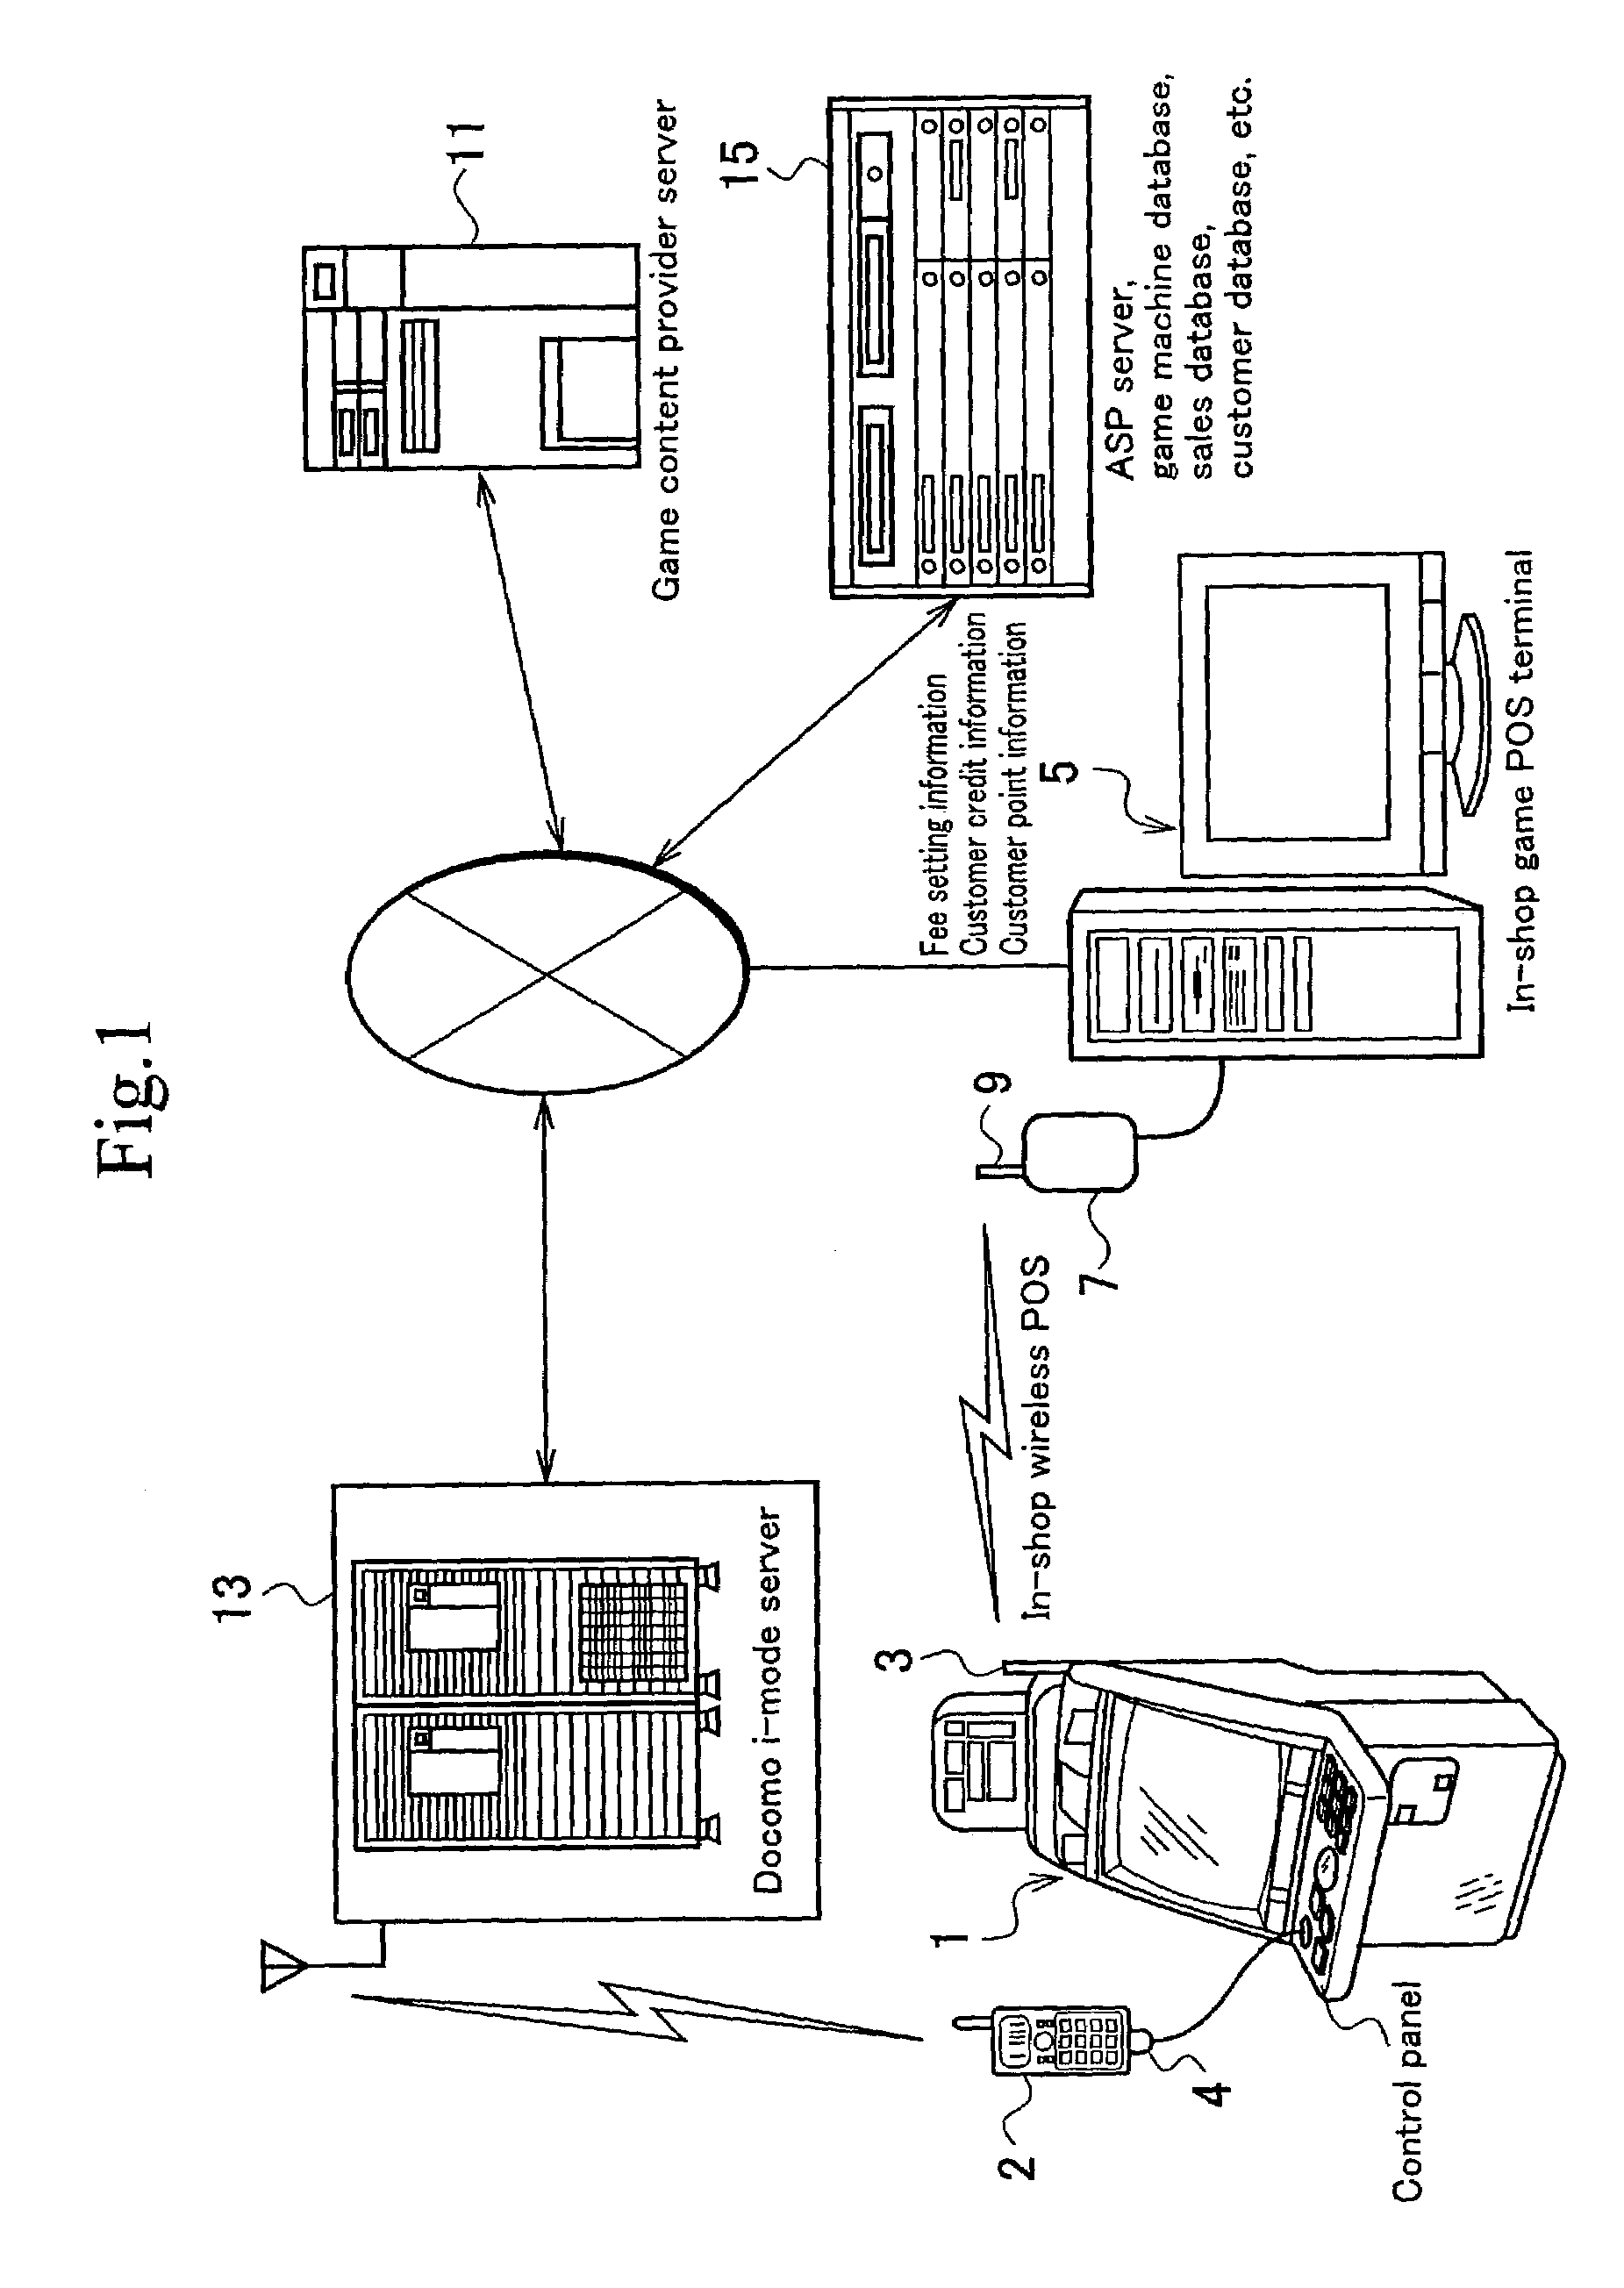 Game system with gaming machine interconnected to a cellular phone